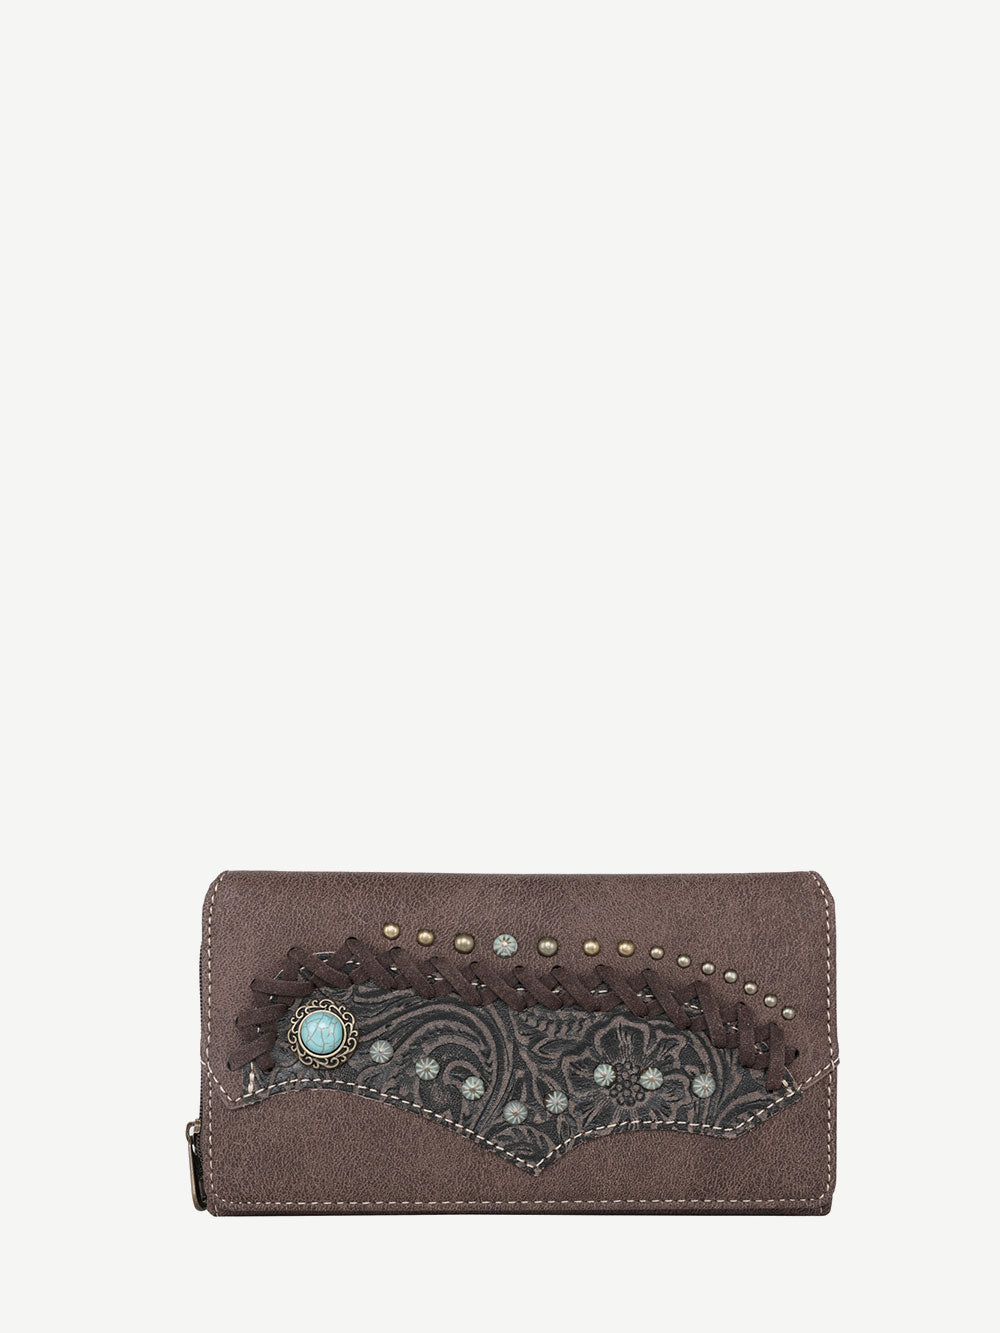 Montana West Criss-cross Stitch Embossed Floral Wallet - Montana West World